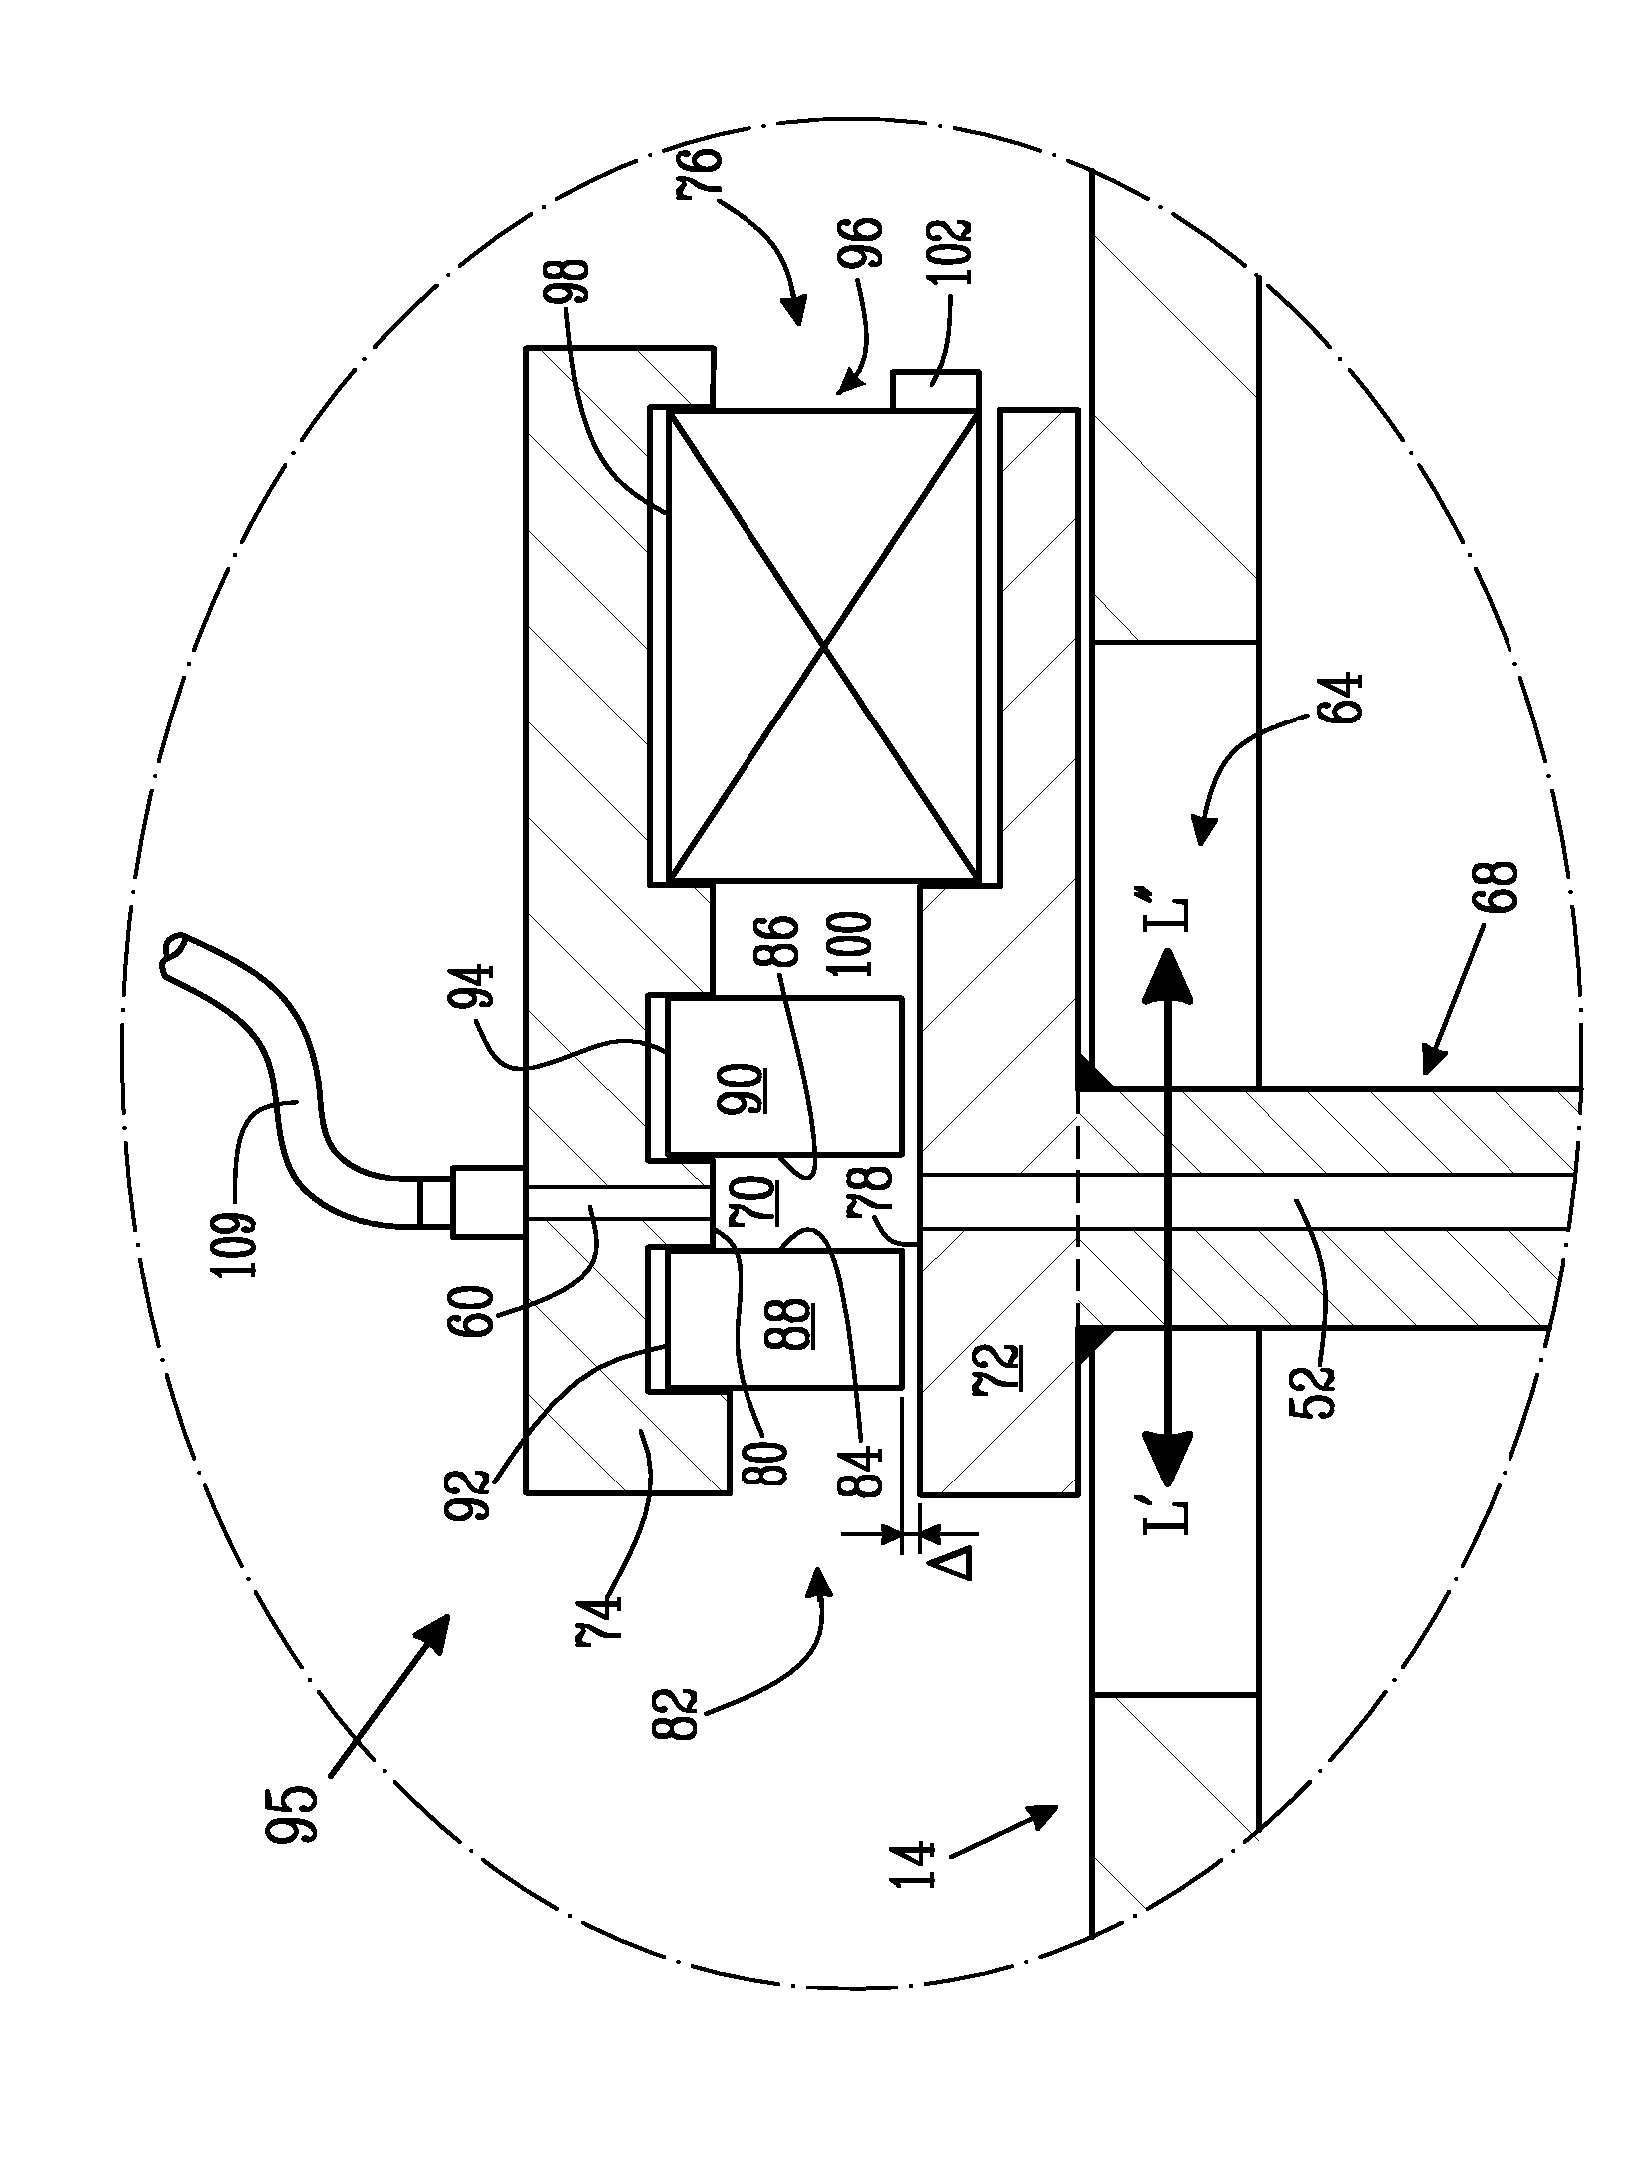 An adjustable propeller arrangement and a method of distributing fluid to and/or from such an adjustable propeller arrangement